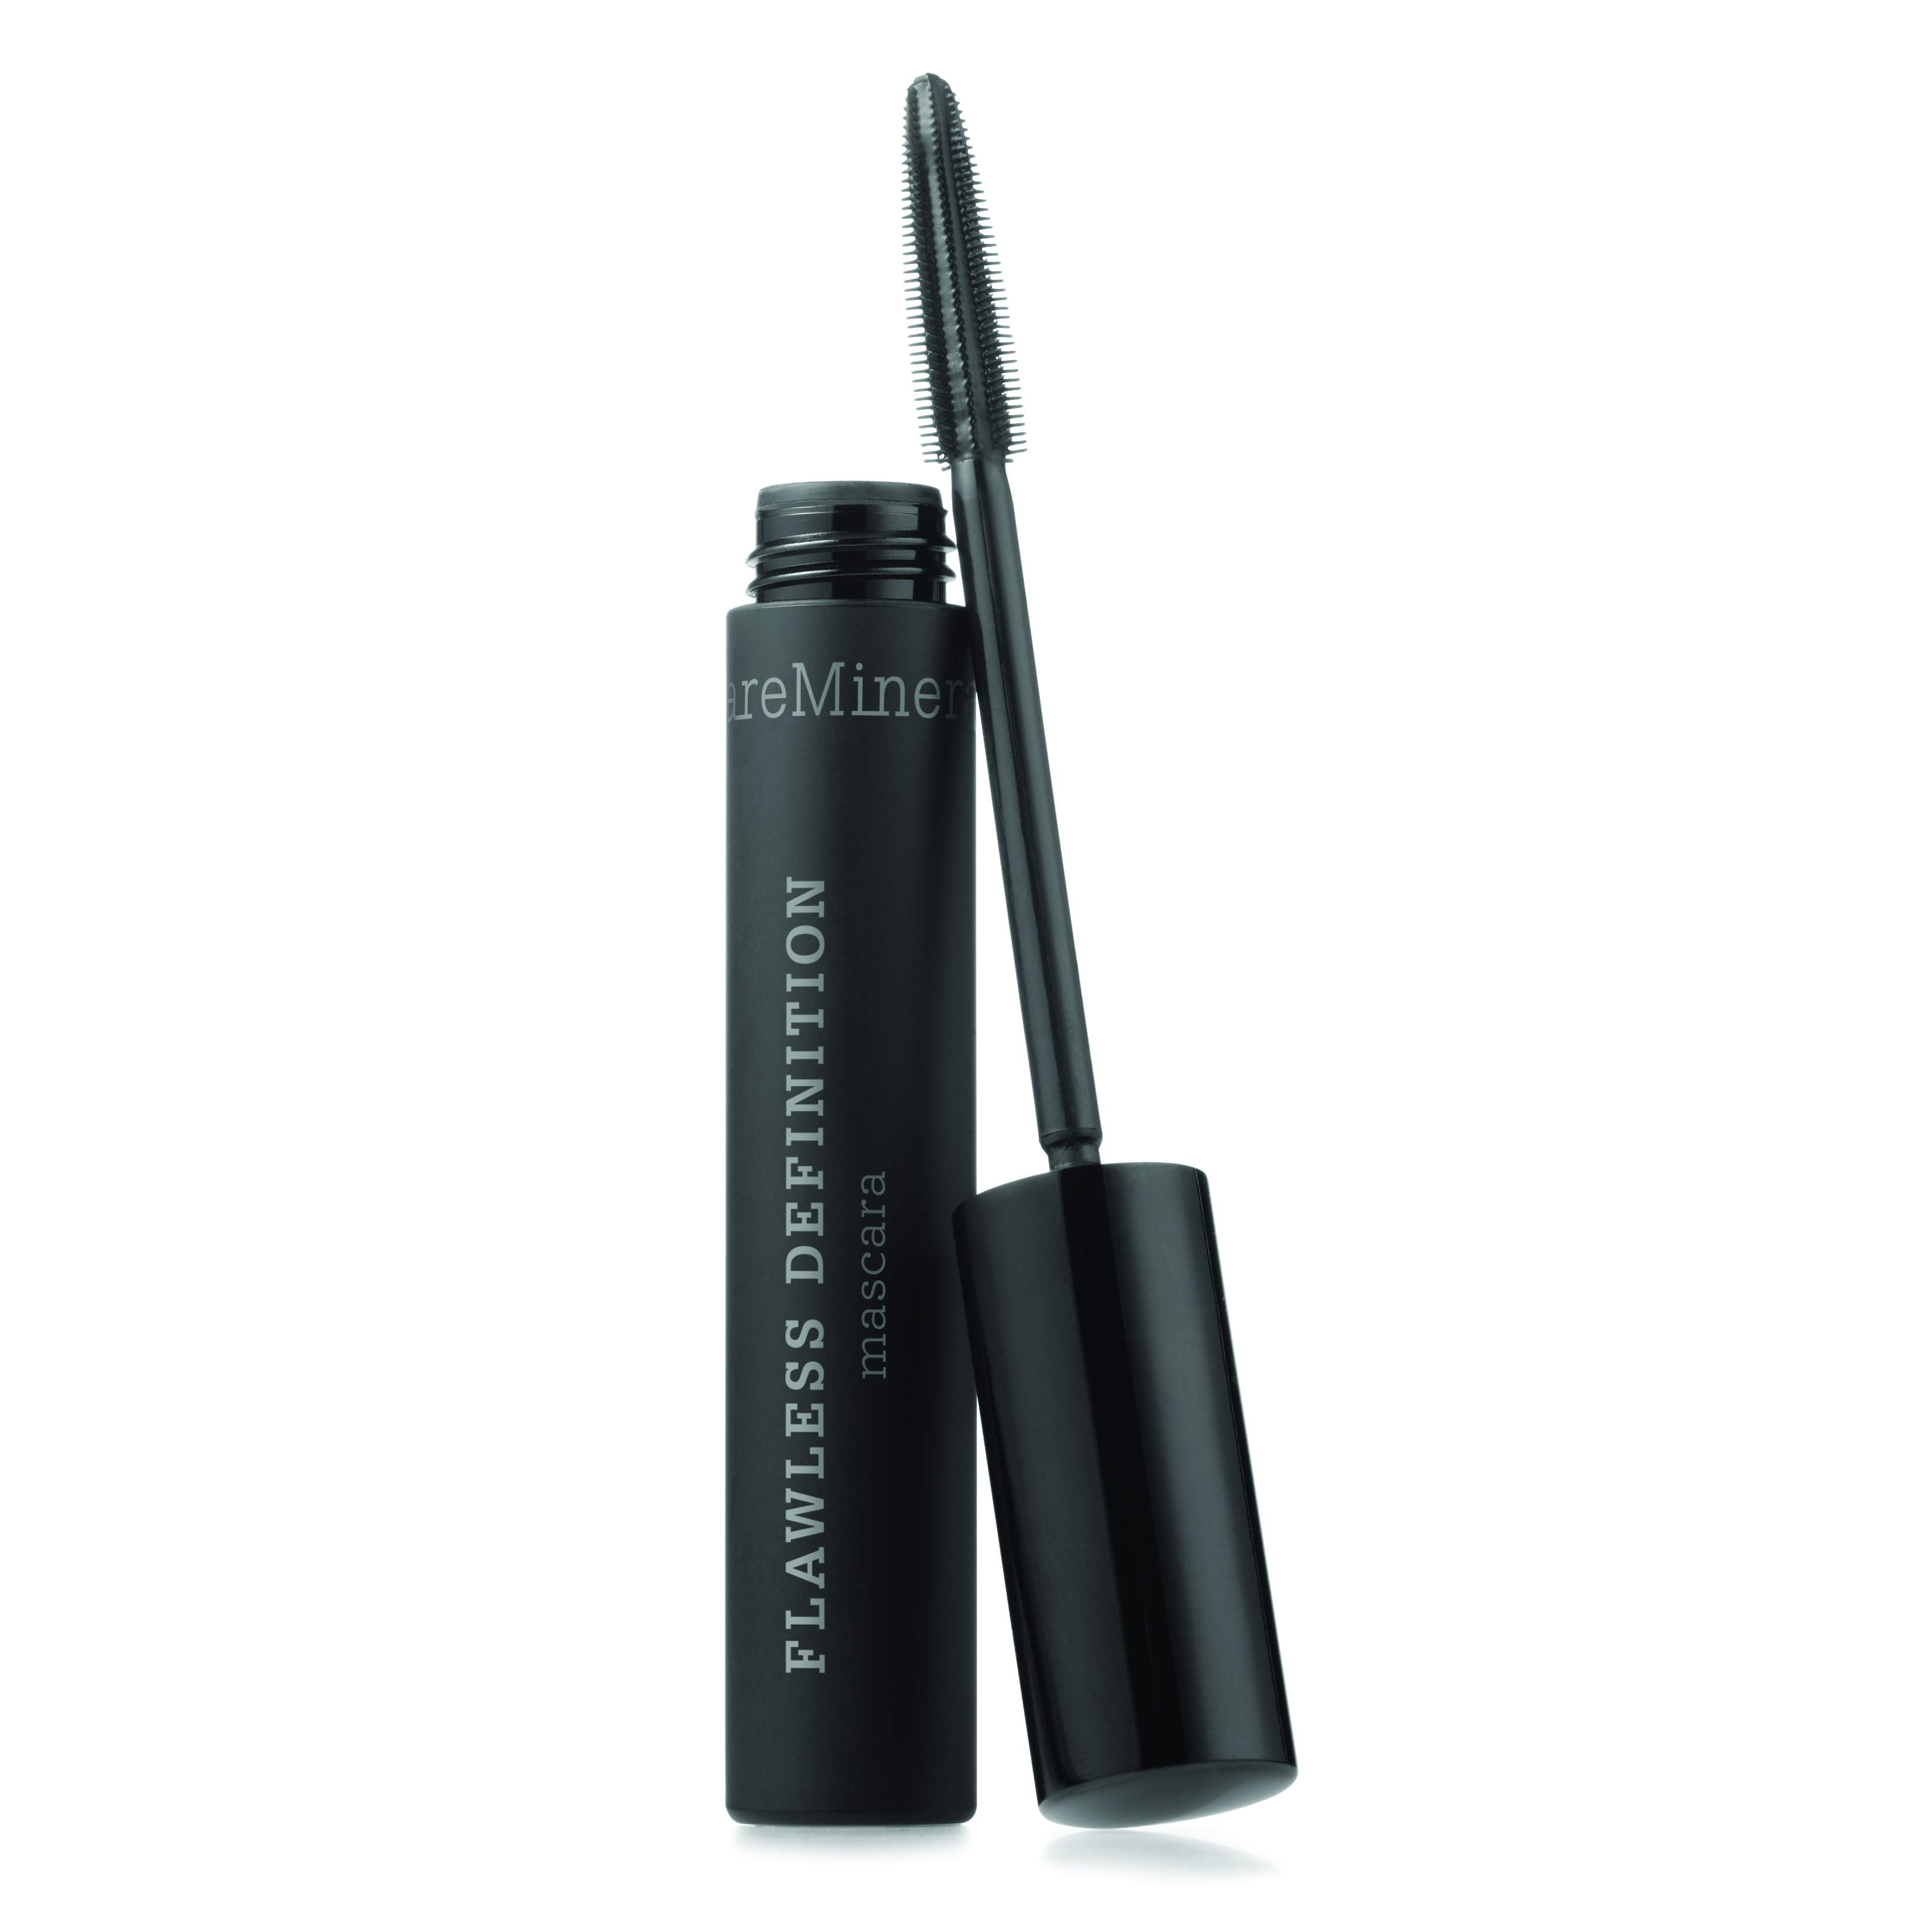 bareminerals flawless definition mascara duo